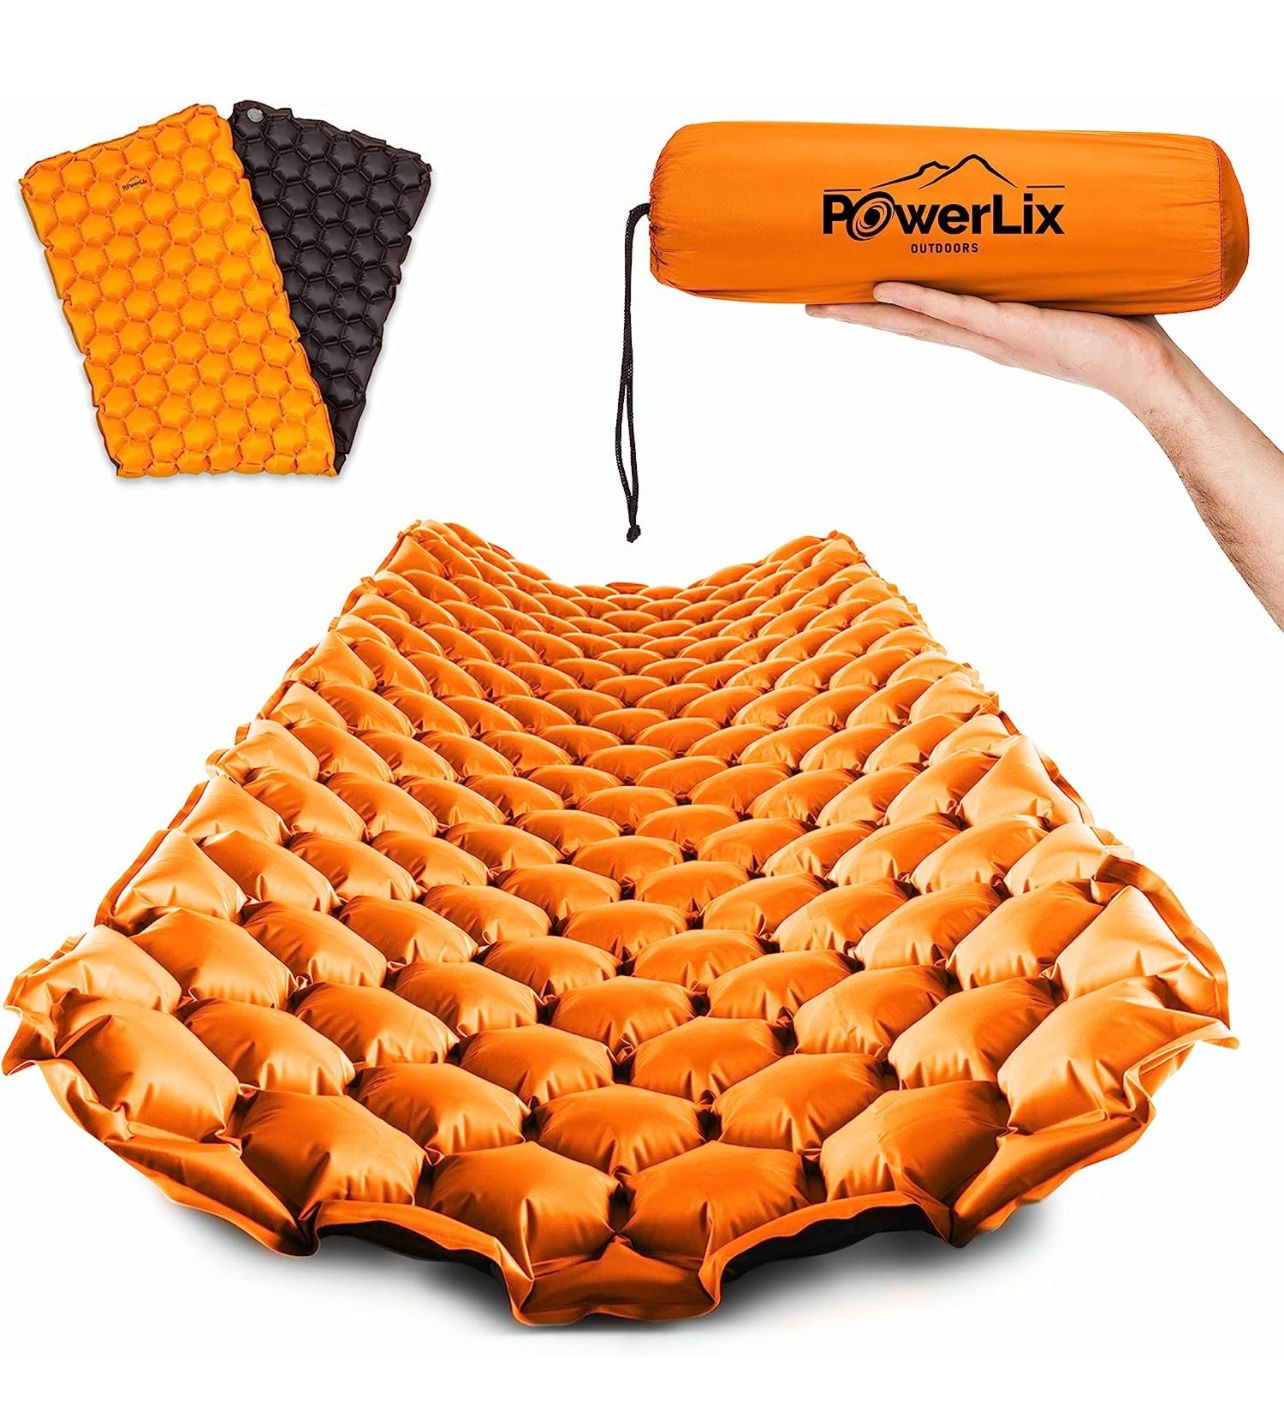 POWERLIX Ultralight Inflatable Sleeping Pad - Camping Mattress for Backpacking, Hiking with Bag, Repair Kit, Compact Sleeping Mat for Camping